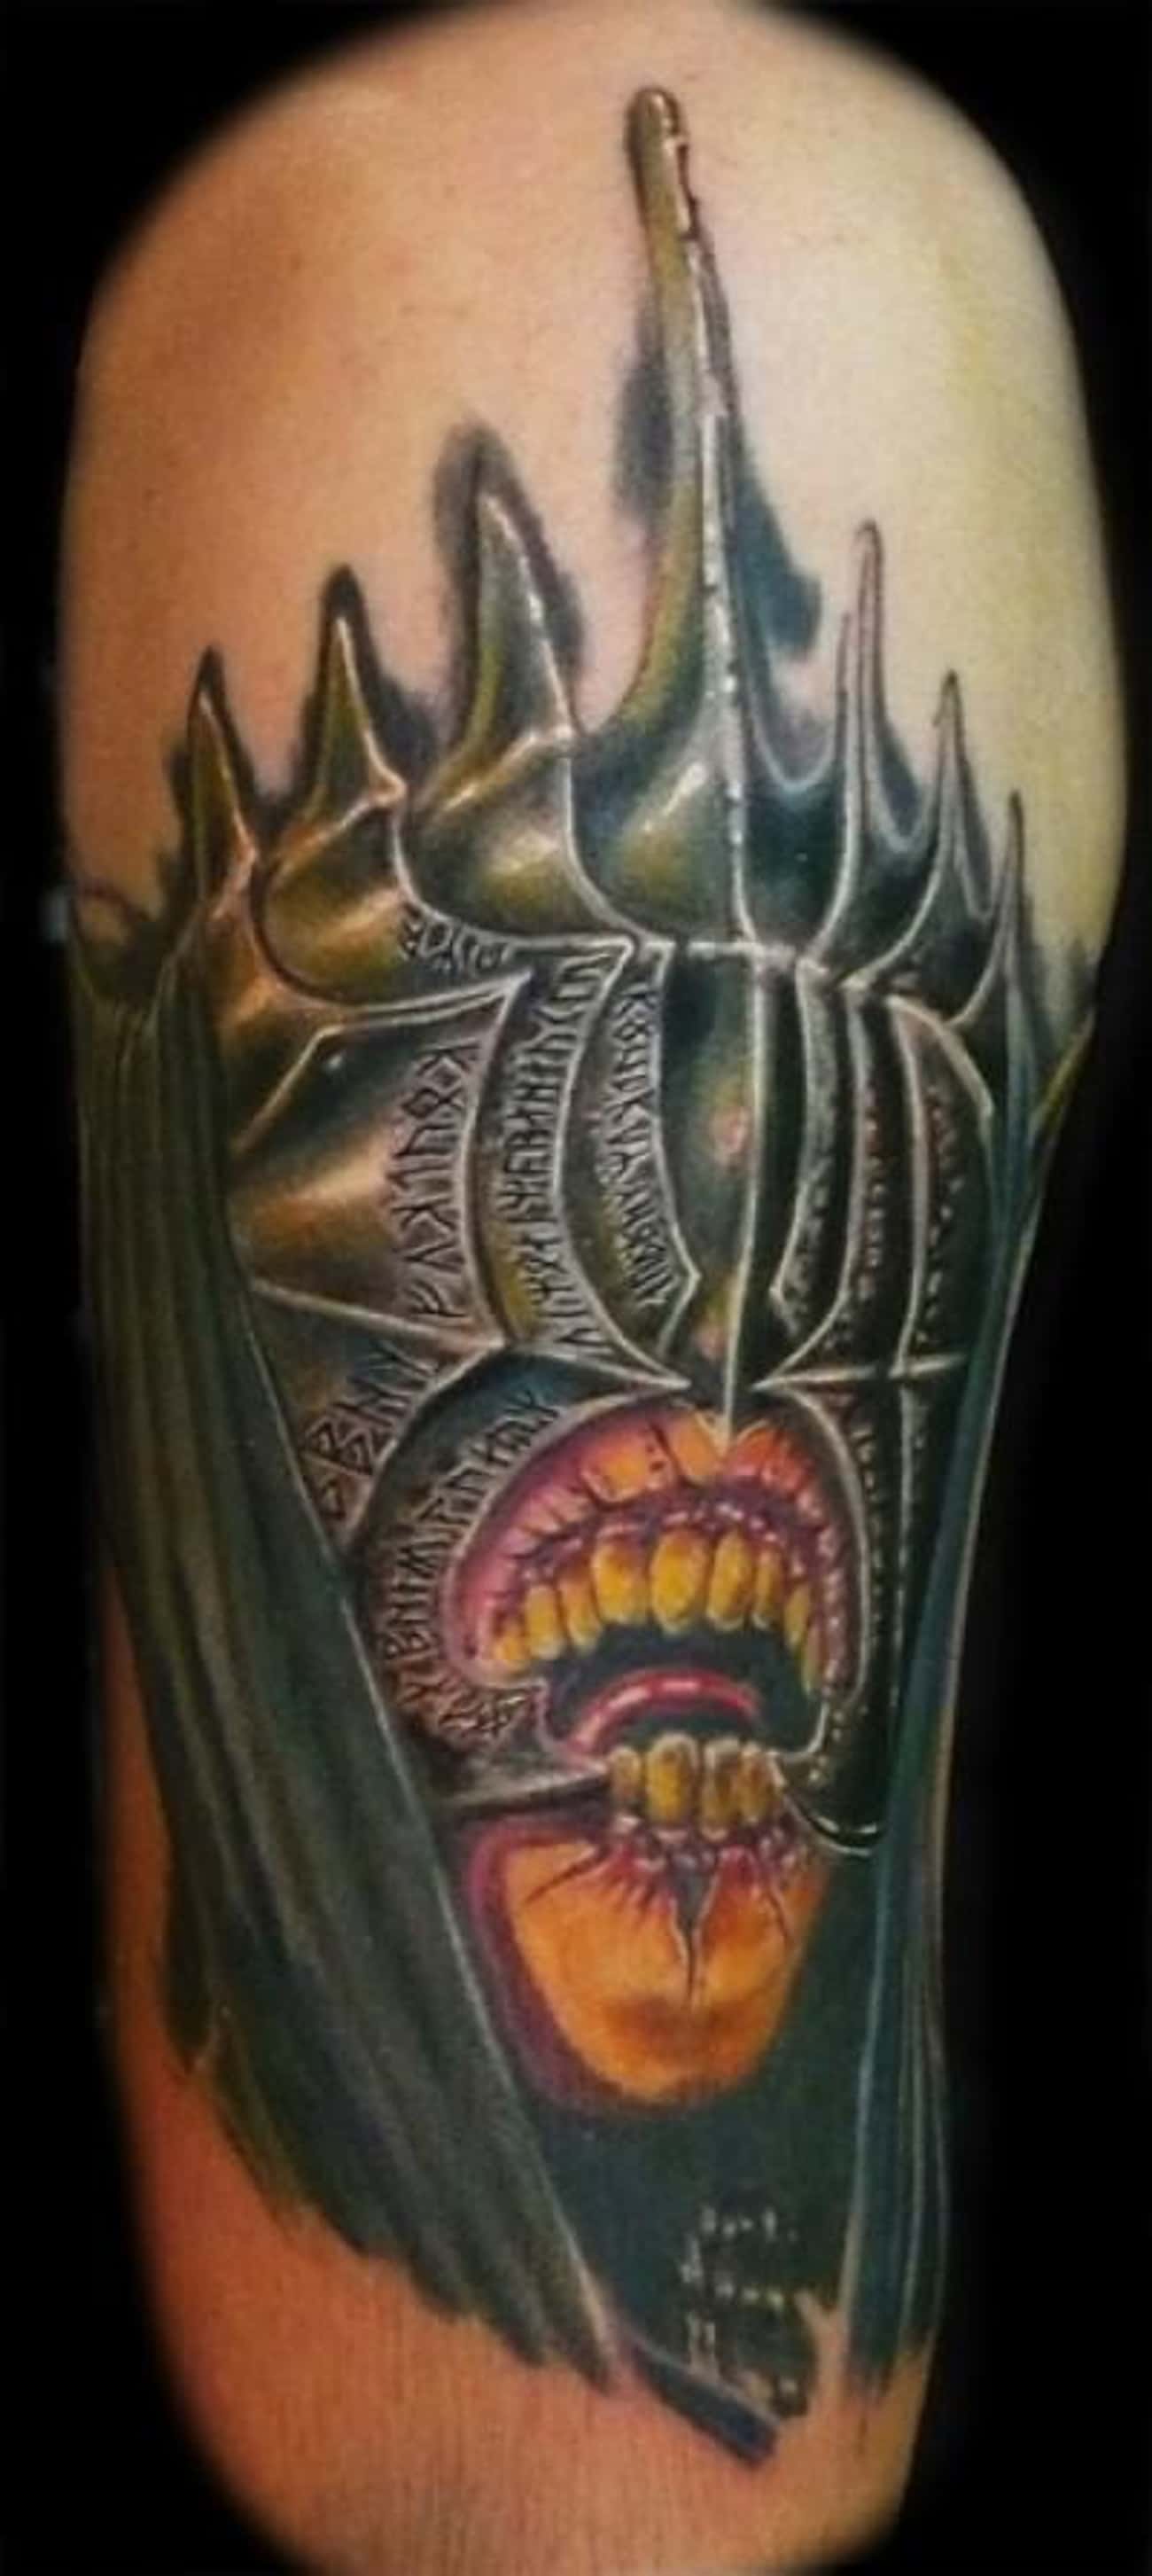 The Mouth of Sauron Is No Less Creepy as a Tattoo